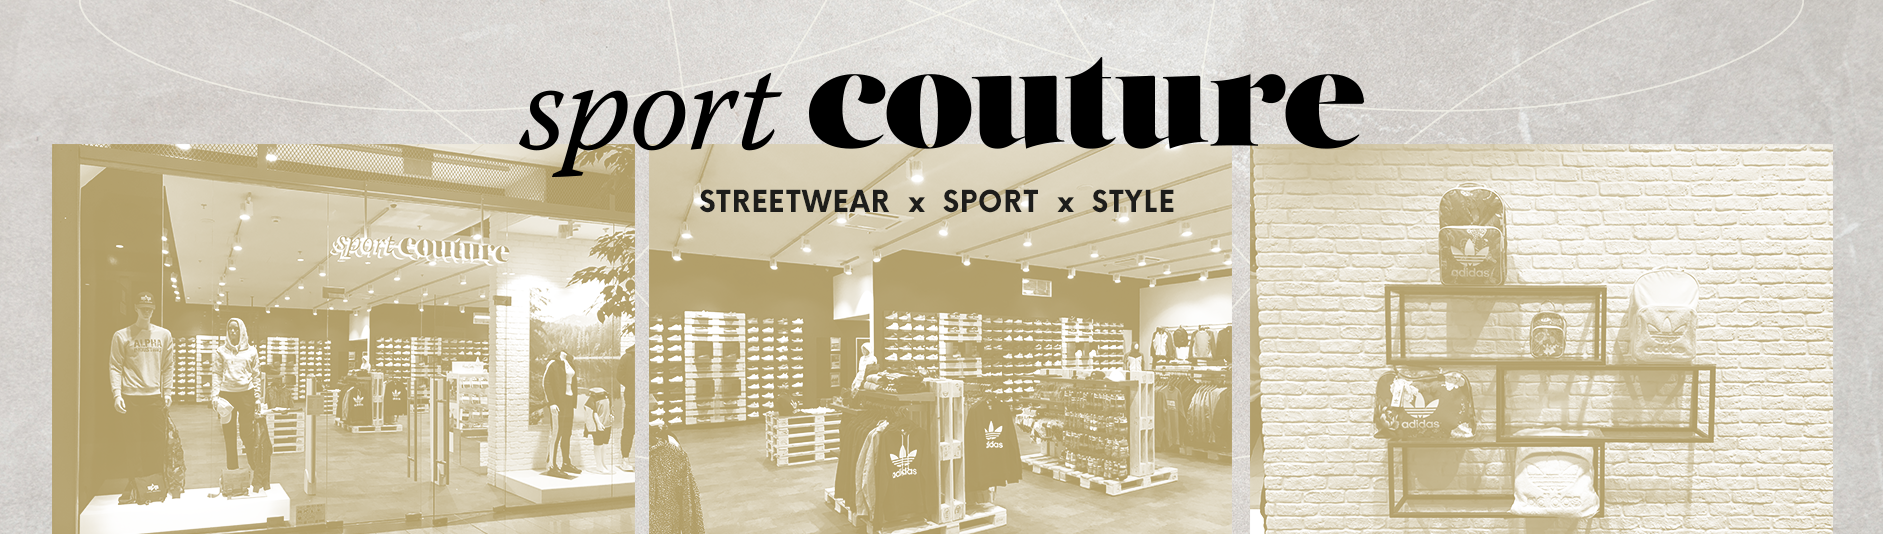 sportcouture-banner-1883x534.png (1883Ã534)